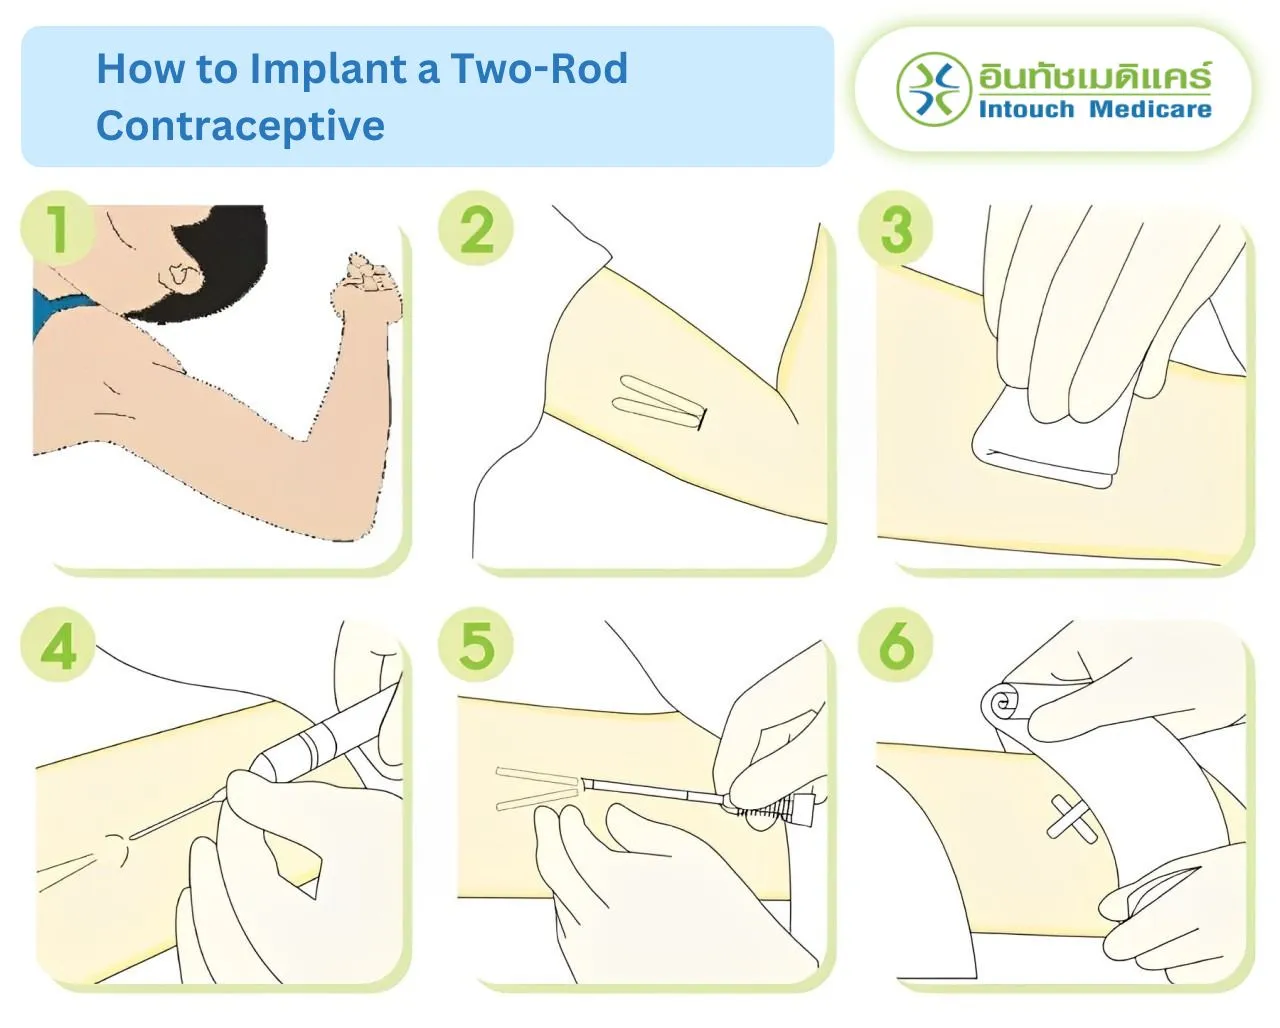 How to Implant a Two-Rod Contraceptive